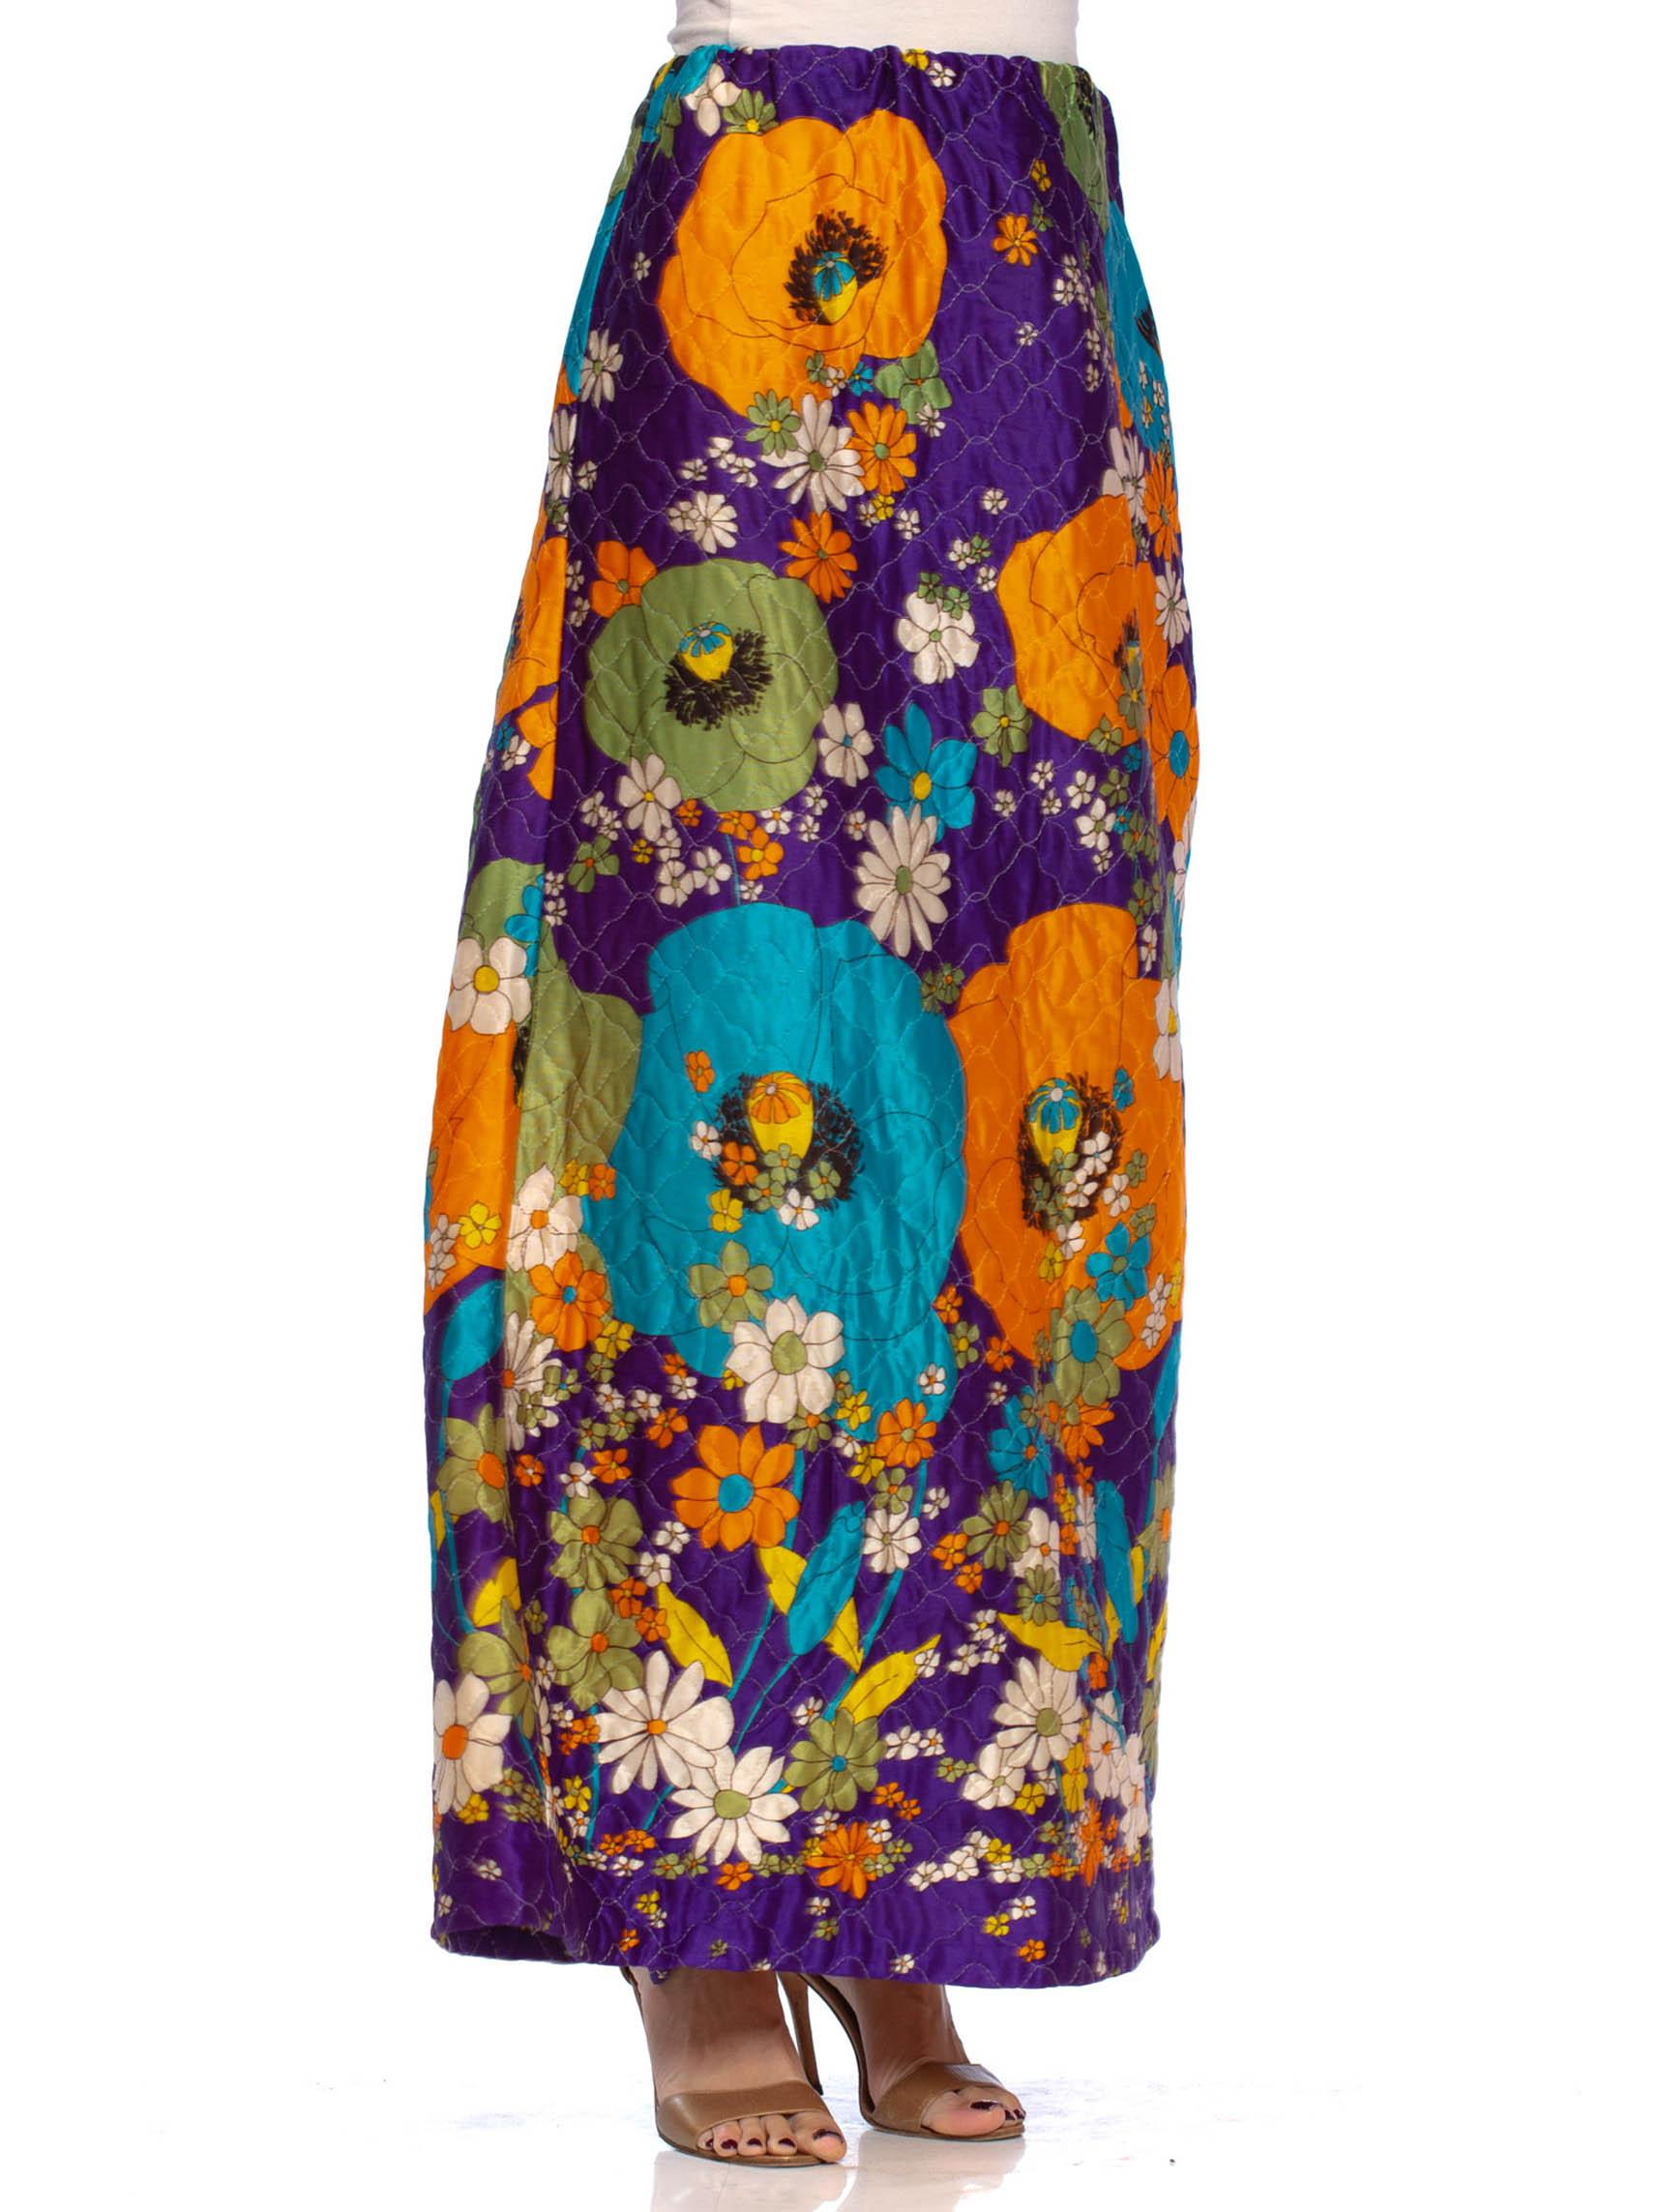 Women's 1970S Purple Quilted Acetate Mod Floral Printed Maxi Skirt Gucci Style